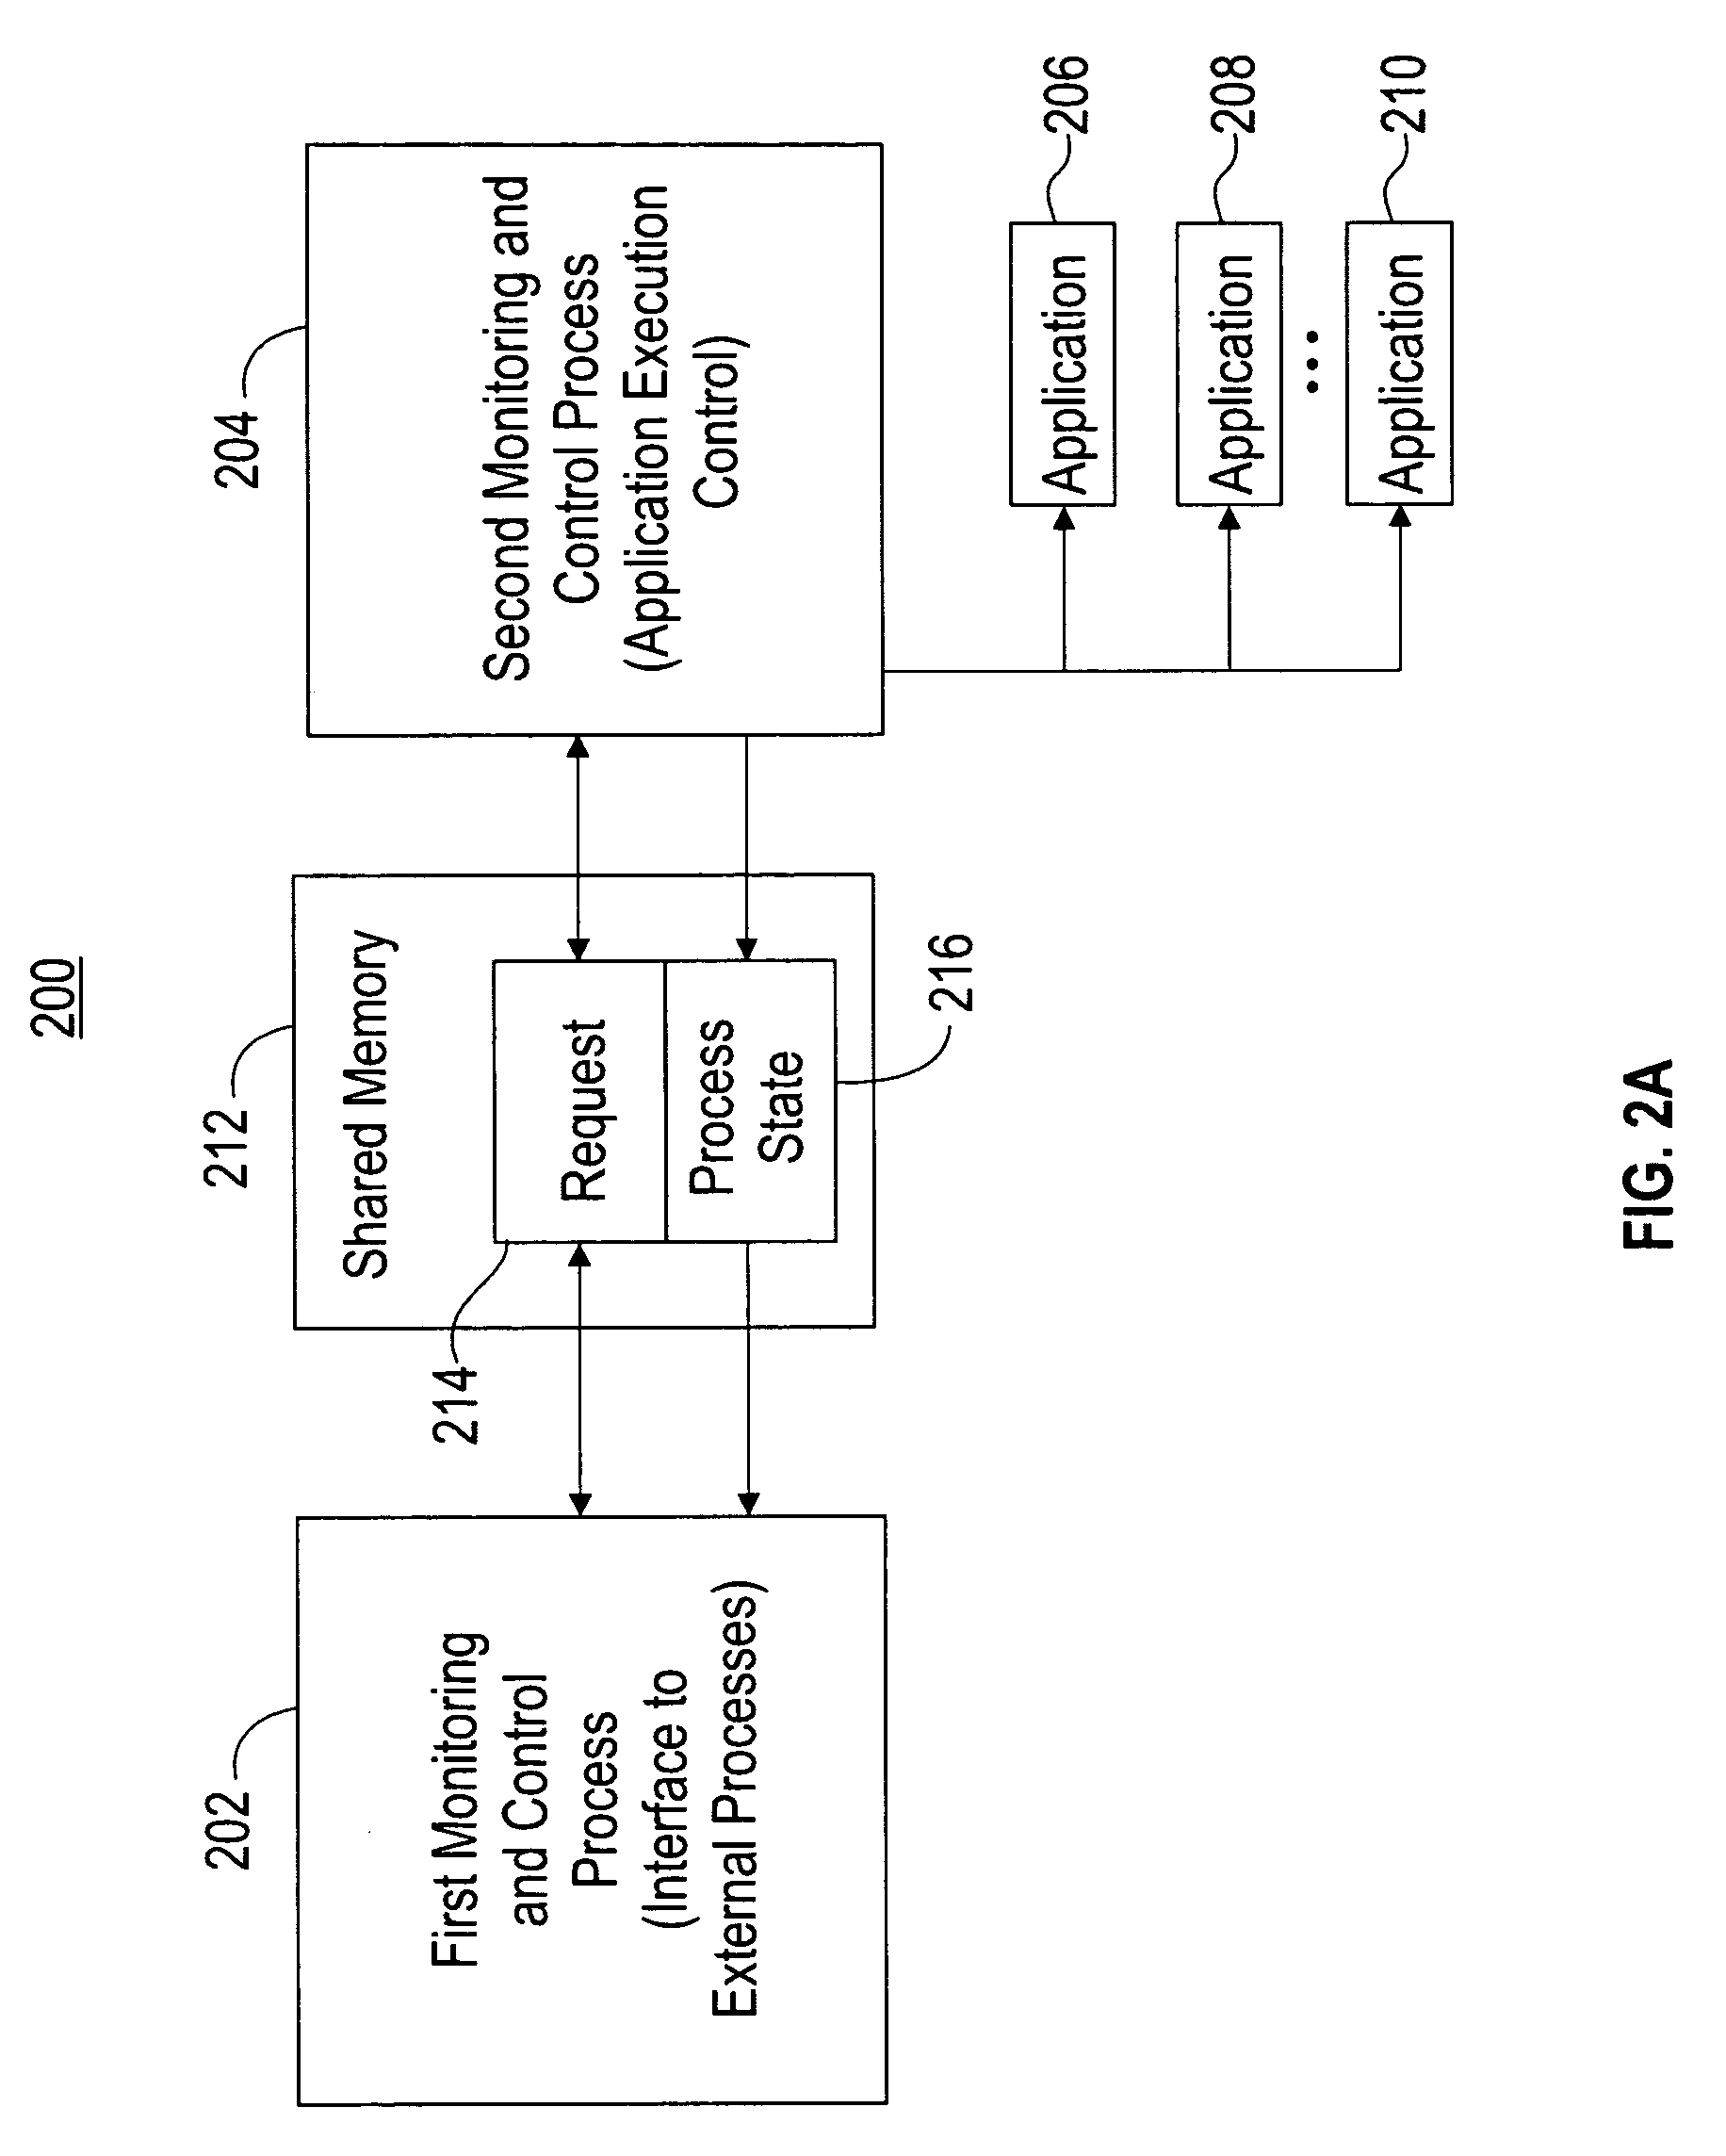 Monitoring and controlling applications executing in a computing node